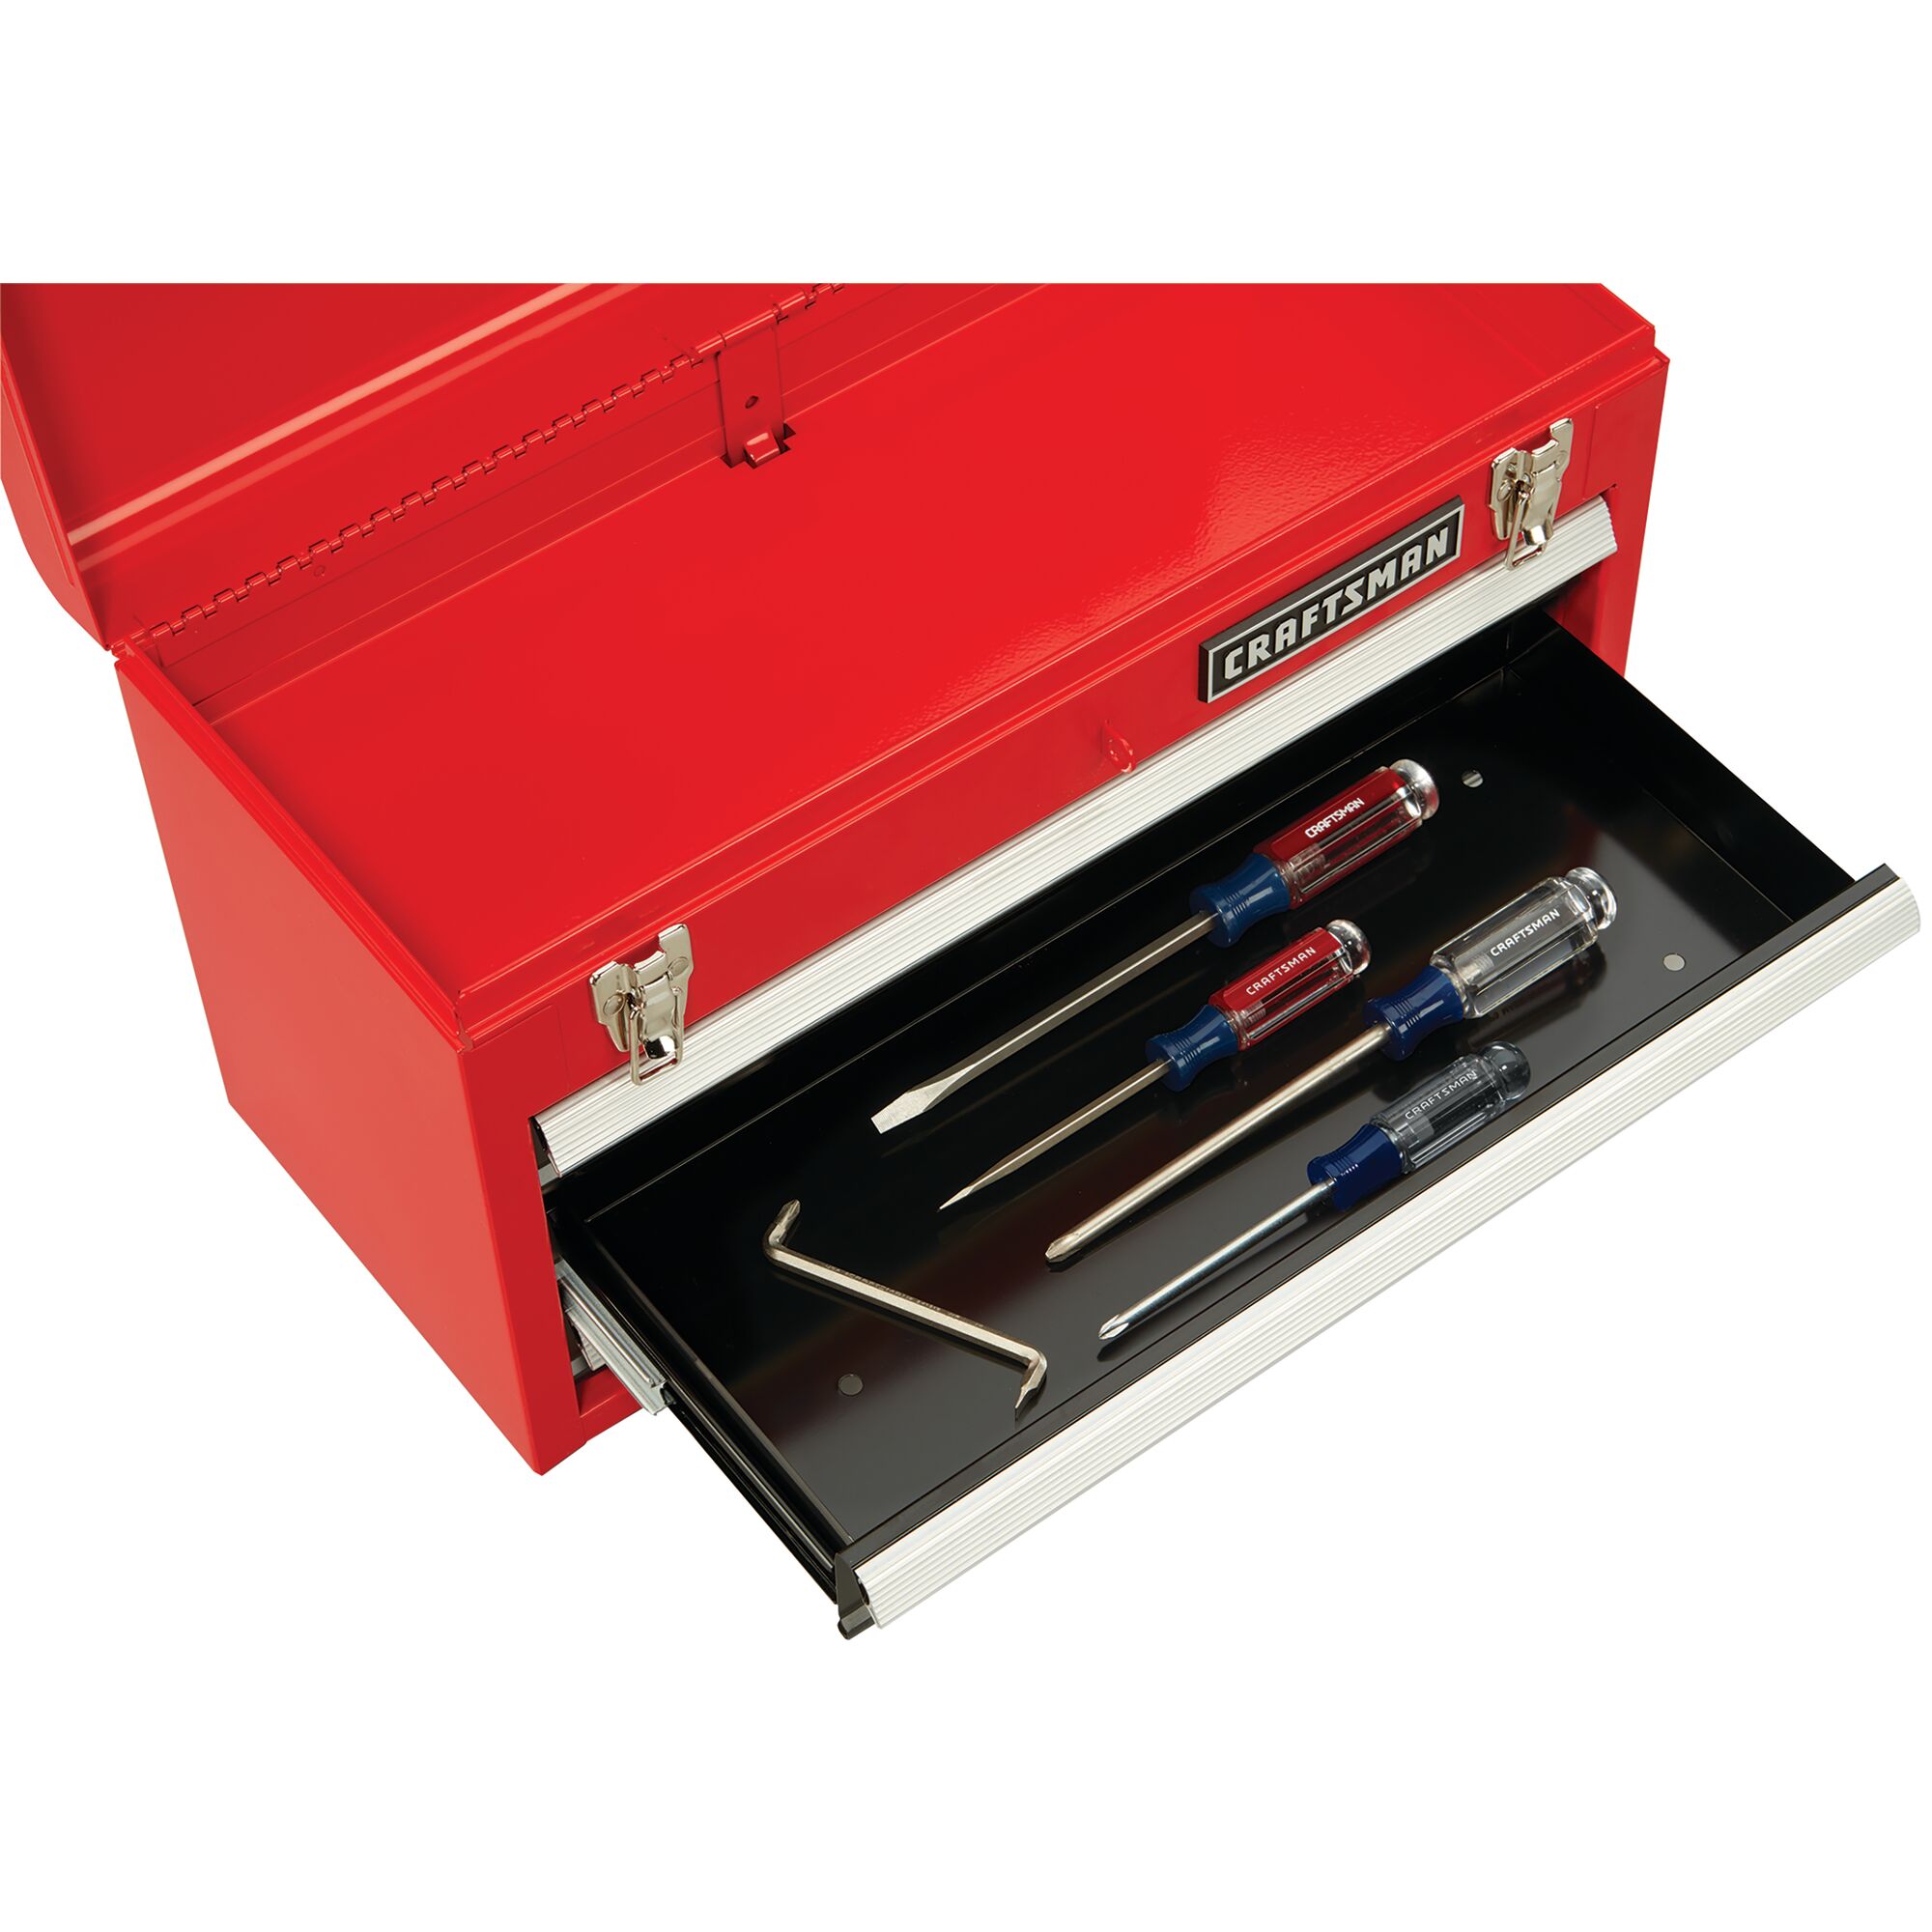 Tools stay organized in drawers feature of portable 20.5 Inch ball bearing 3 drawer steel lockable tool box.